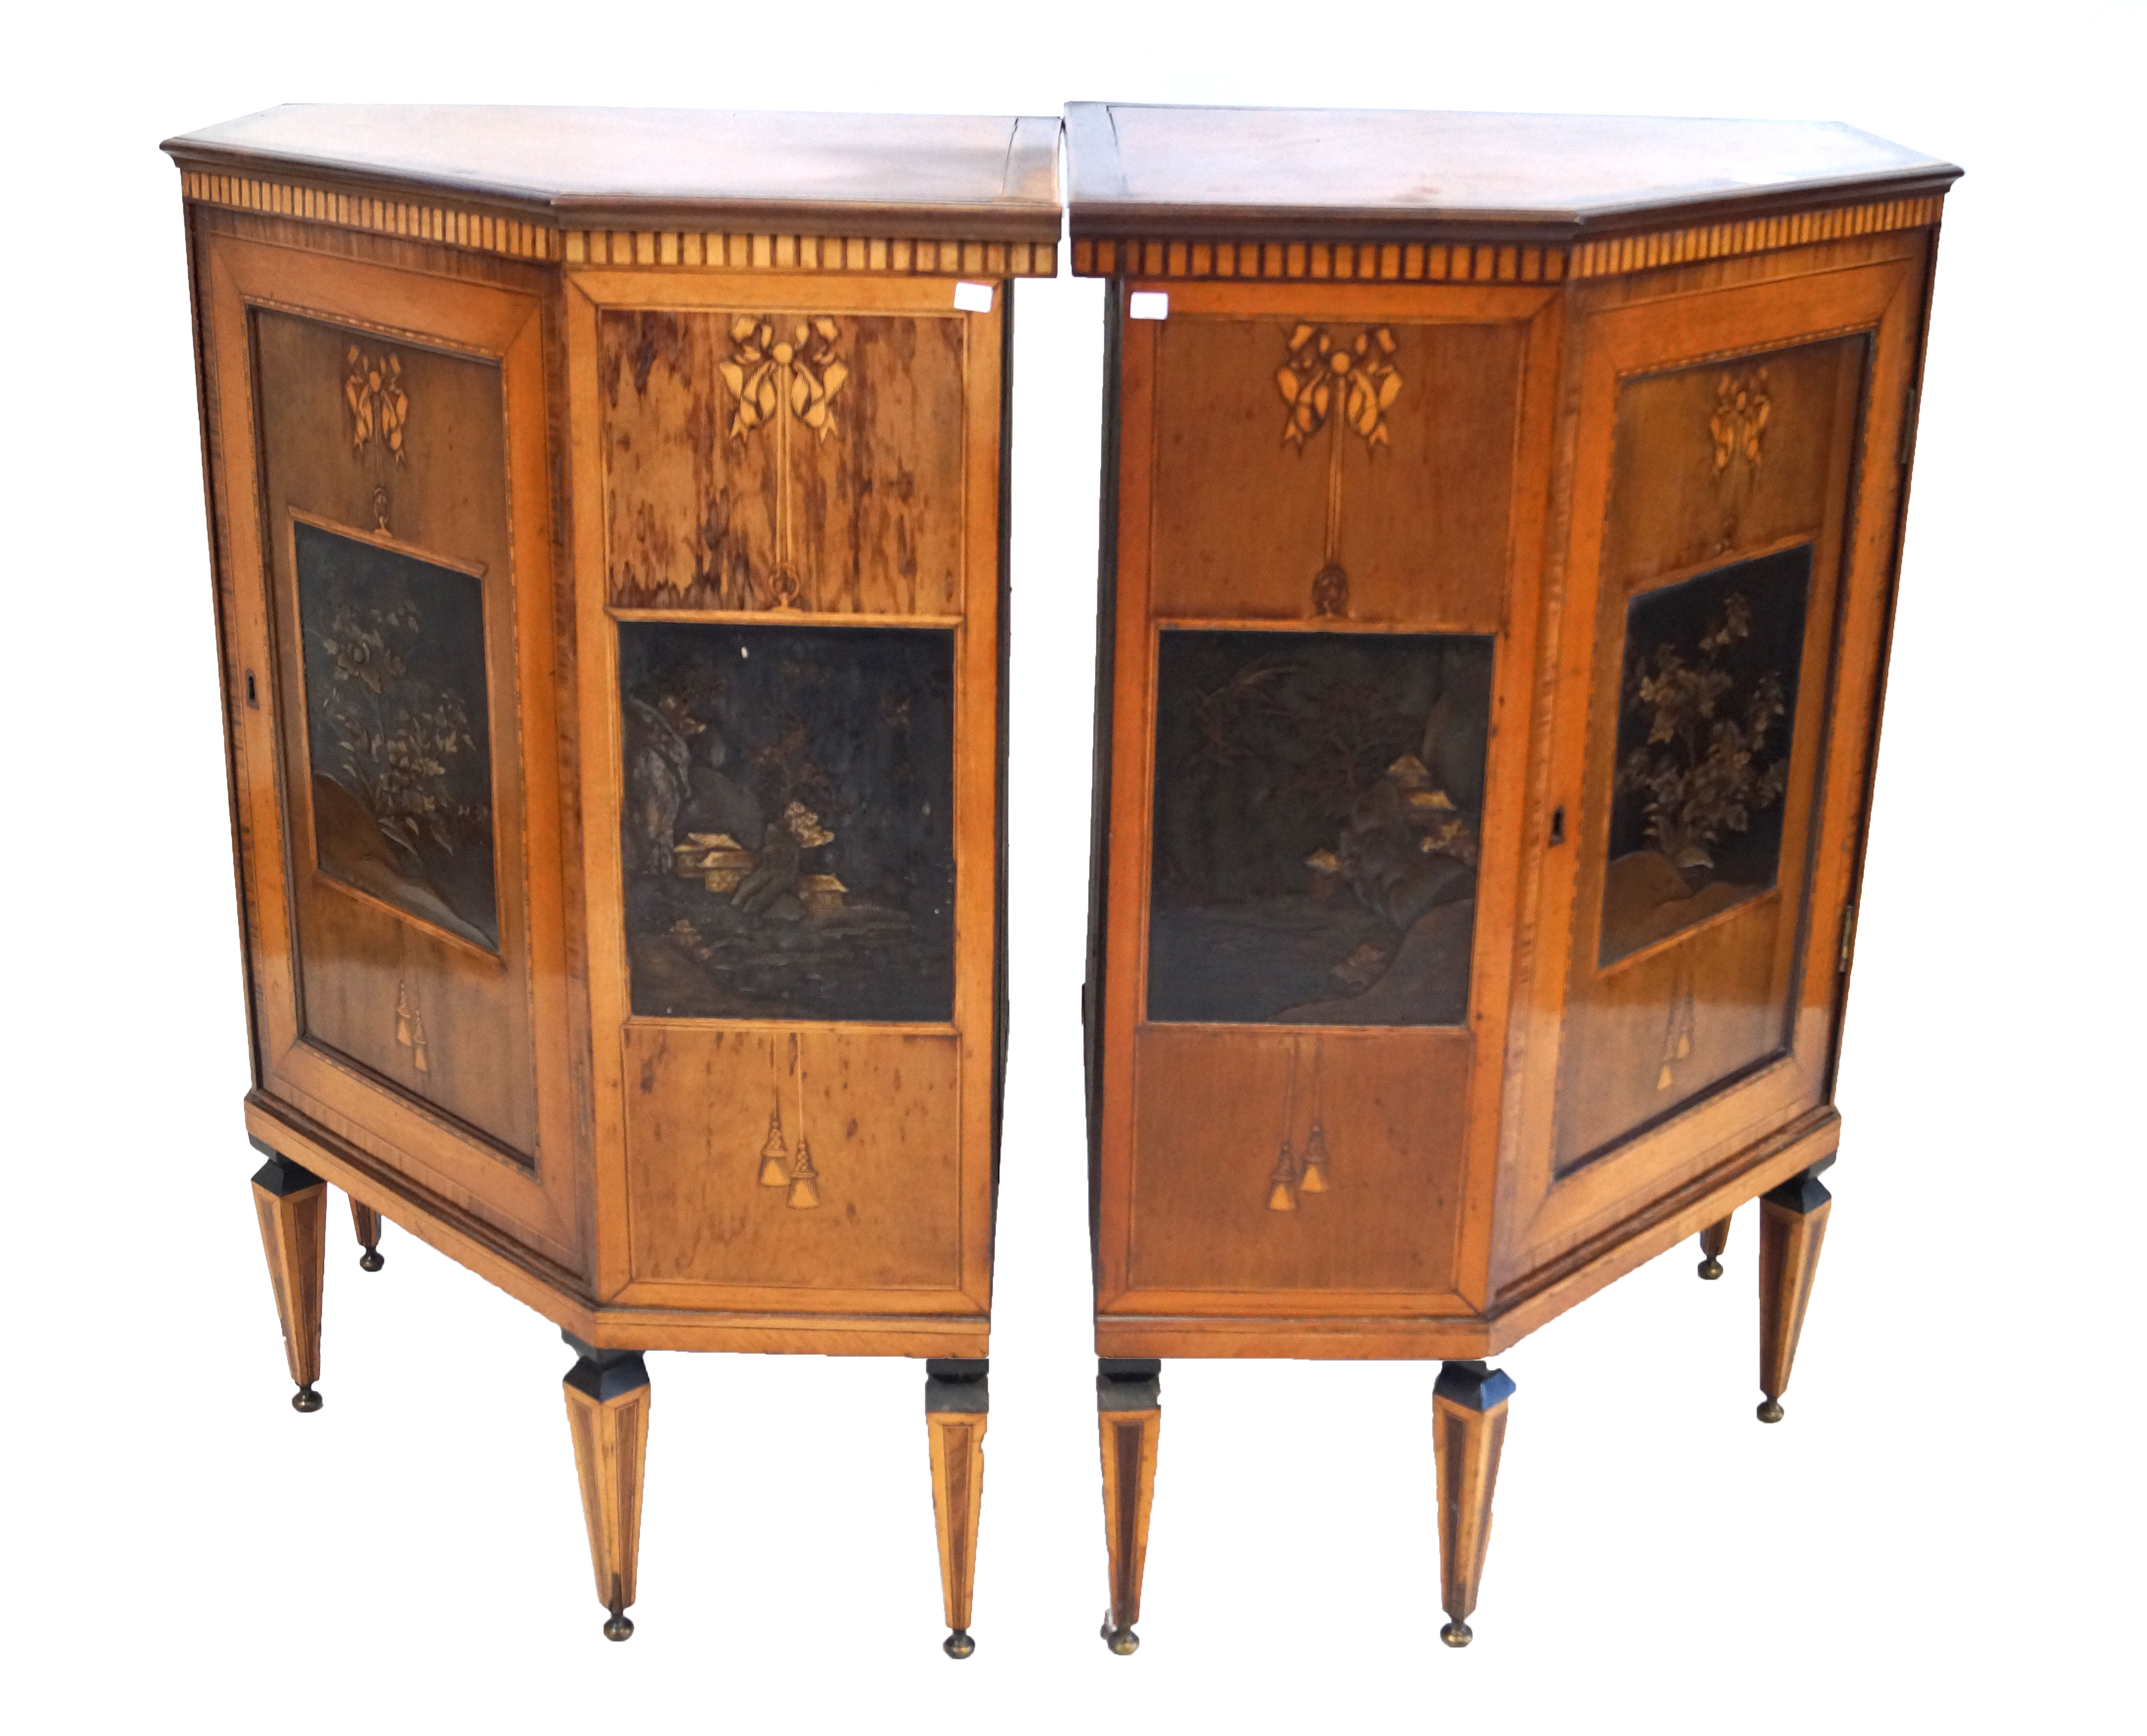 A pair of fine quality and highly decorative 19th Century inlaid and lacquered low corner